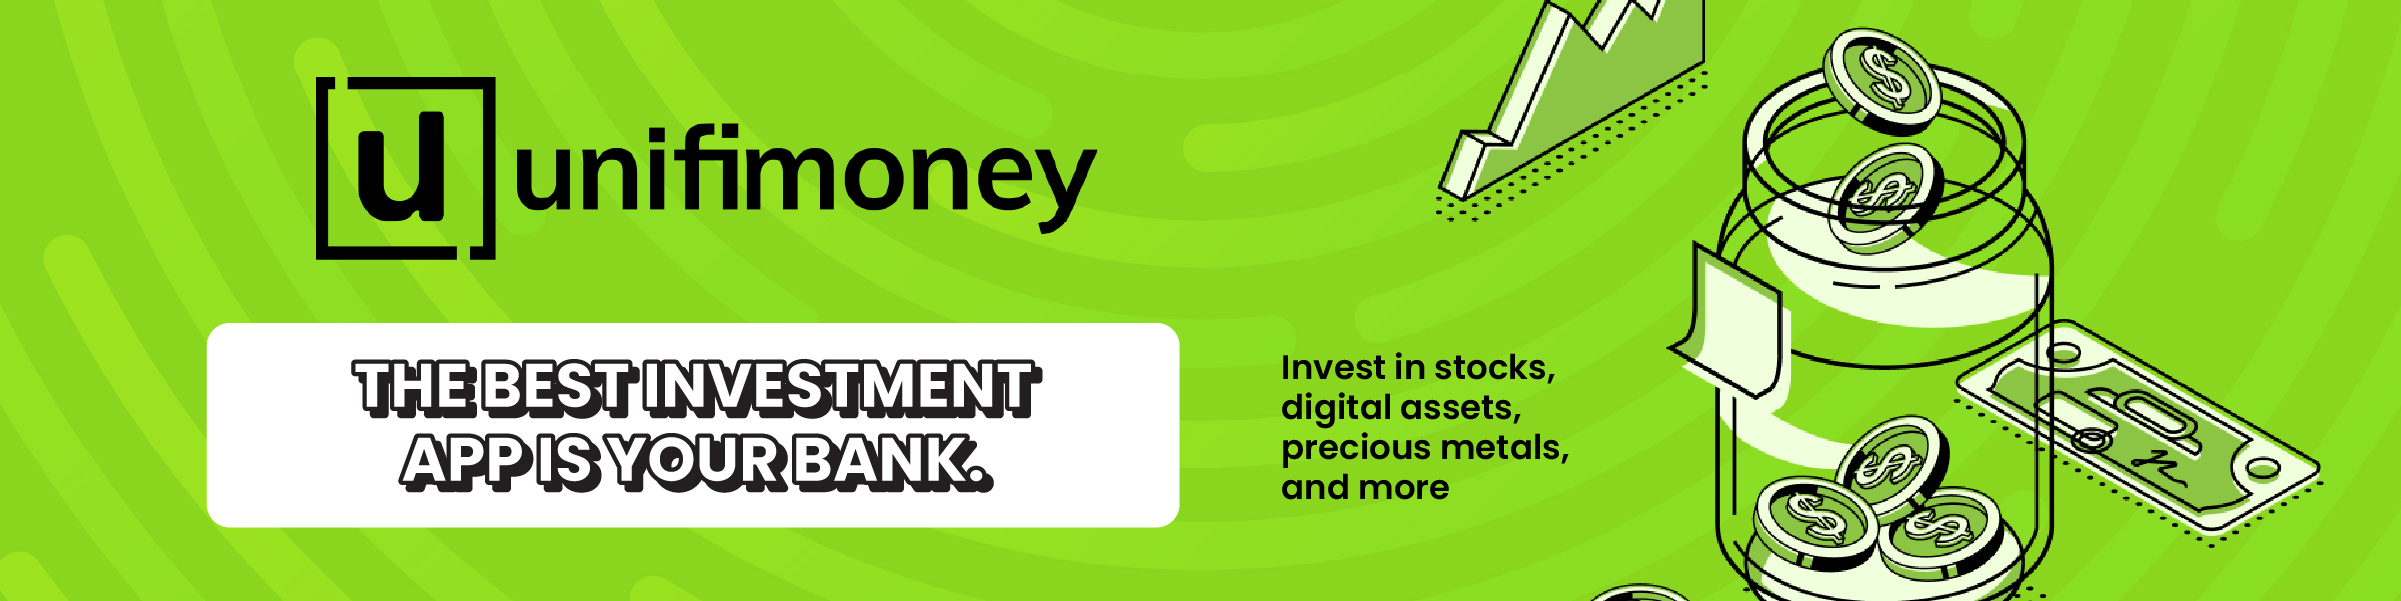 Unifimoney header. Get a $5 trading credit to jumpstart your Unifimoney account.